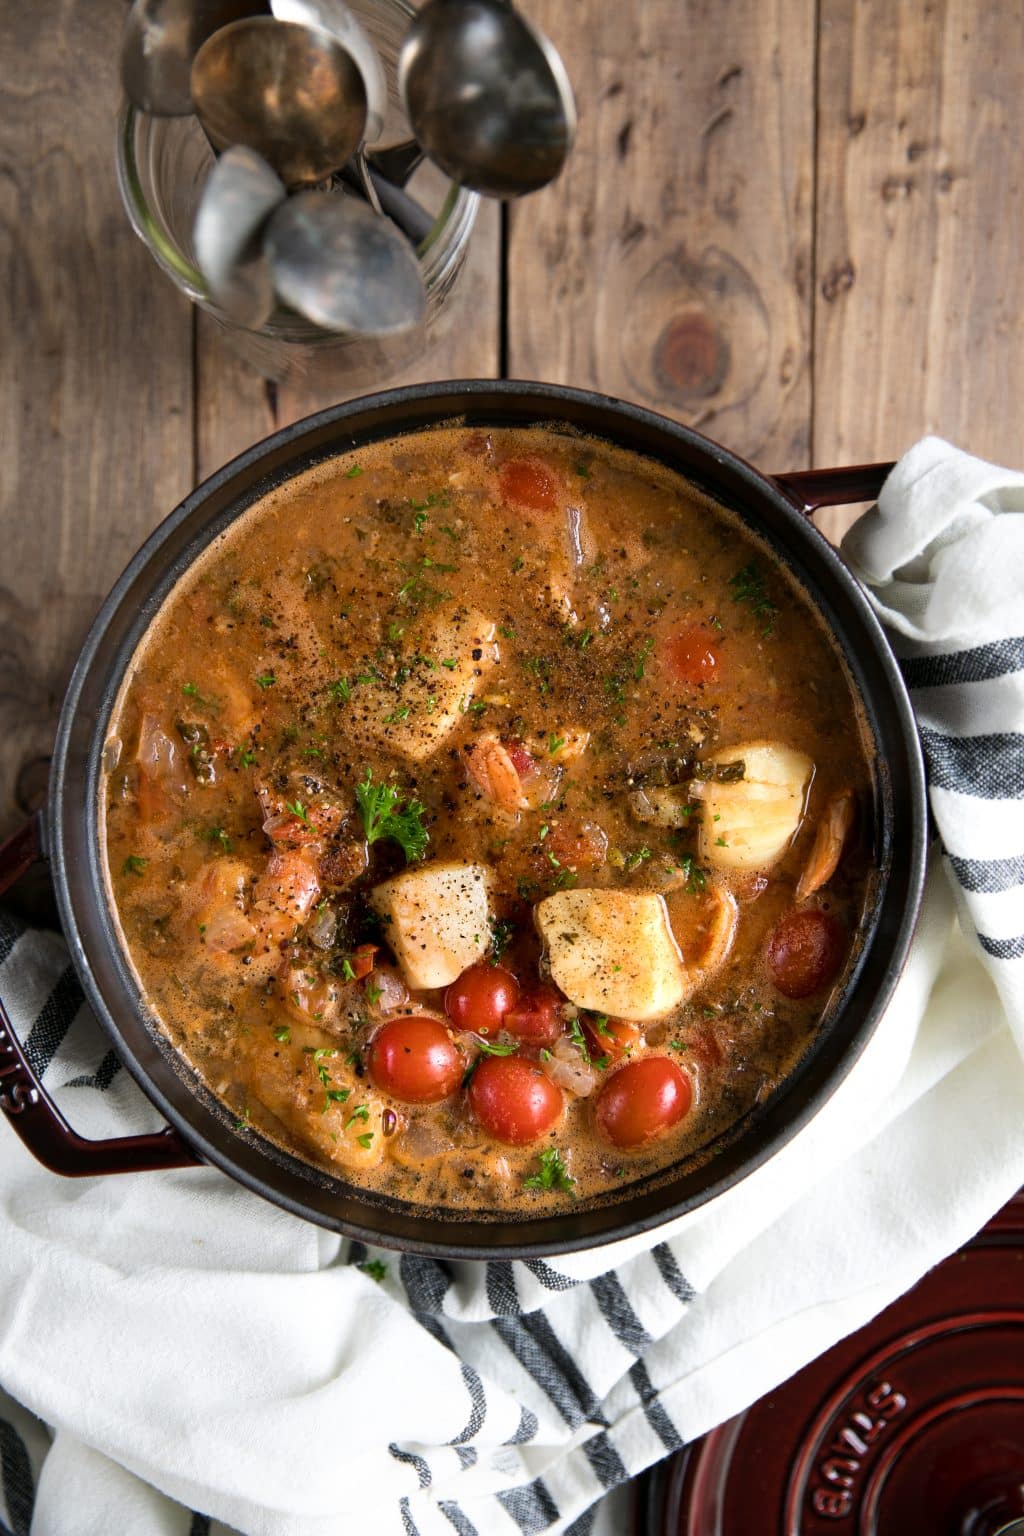 Pot of fish soup with fresh chunks of white fish, juicy shrimp, and a rich, comforting tomato broth.